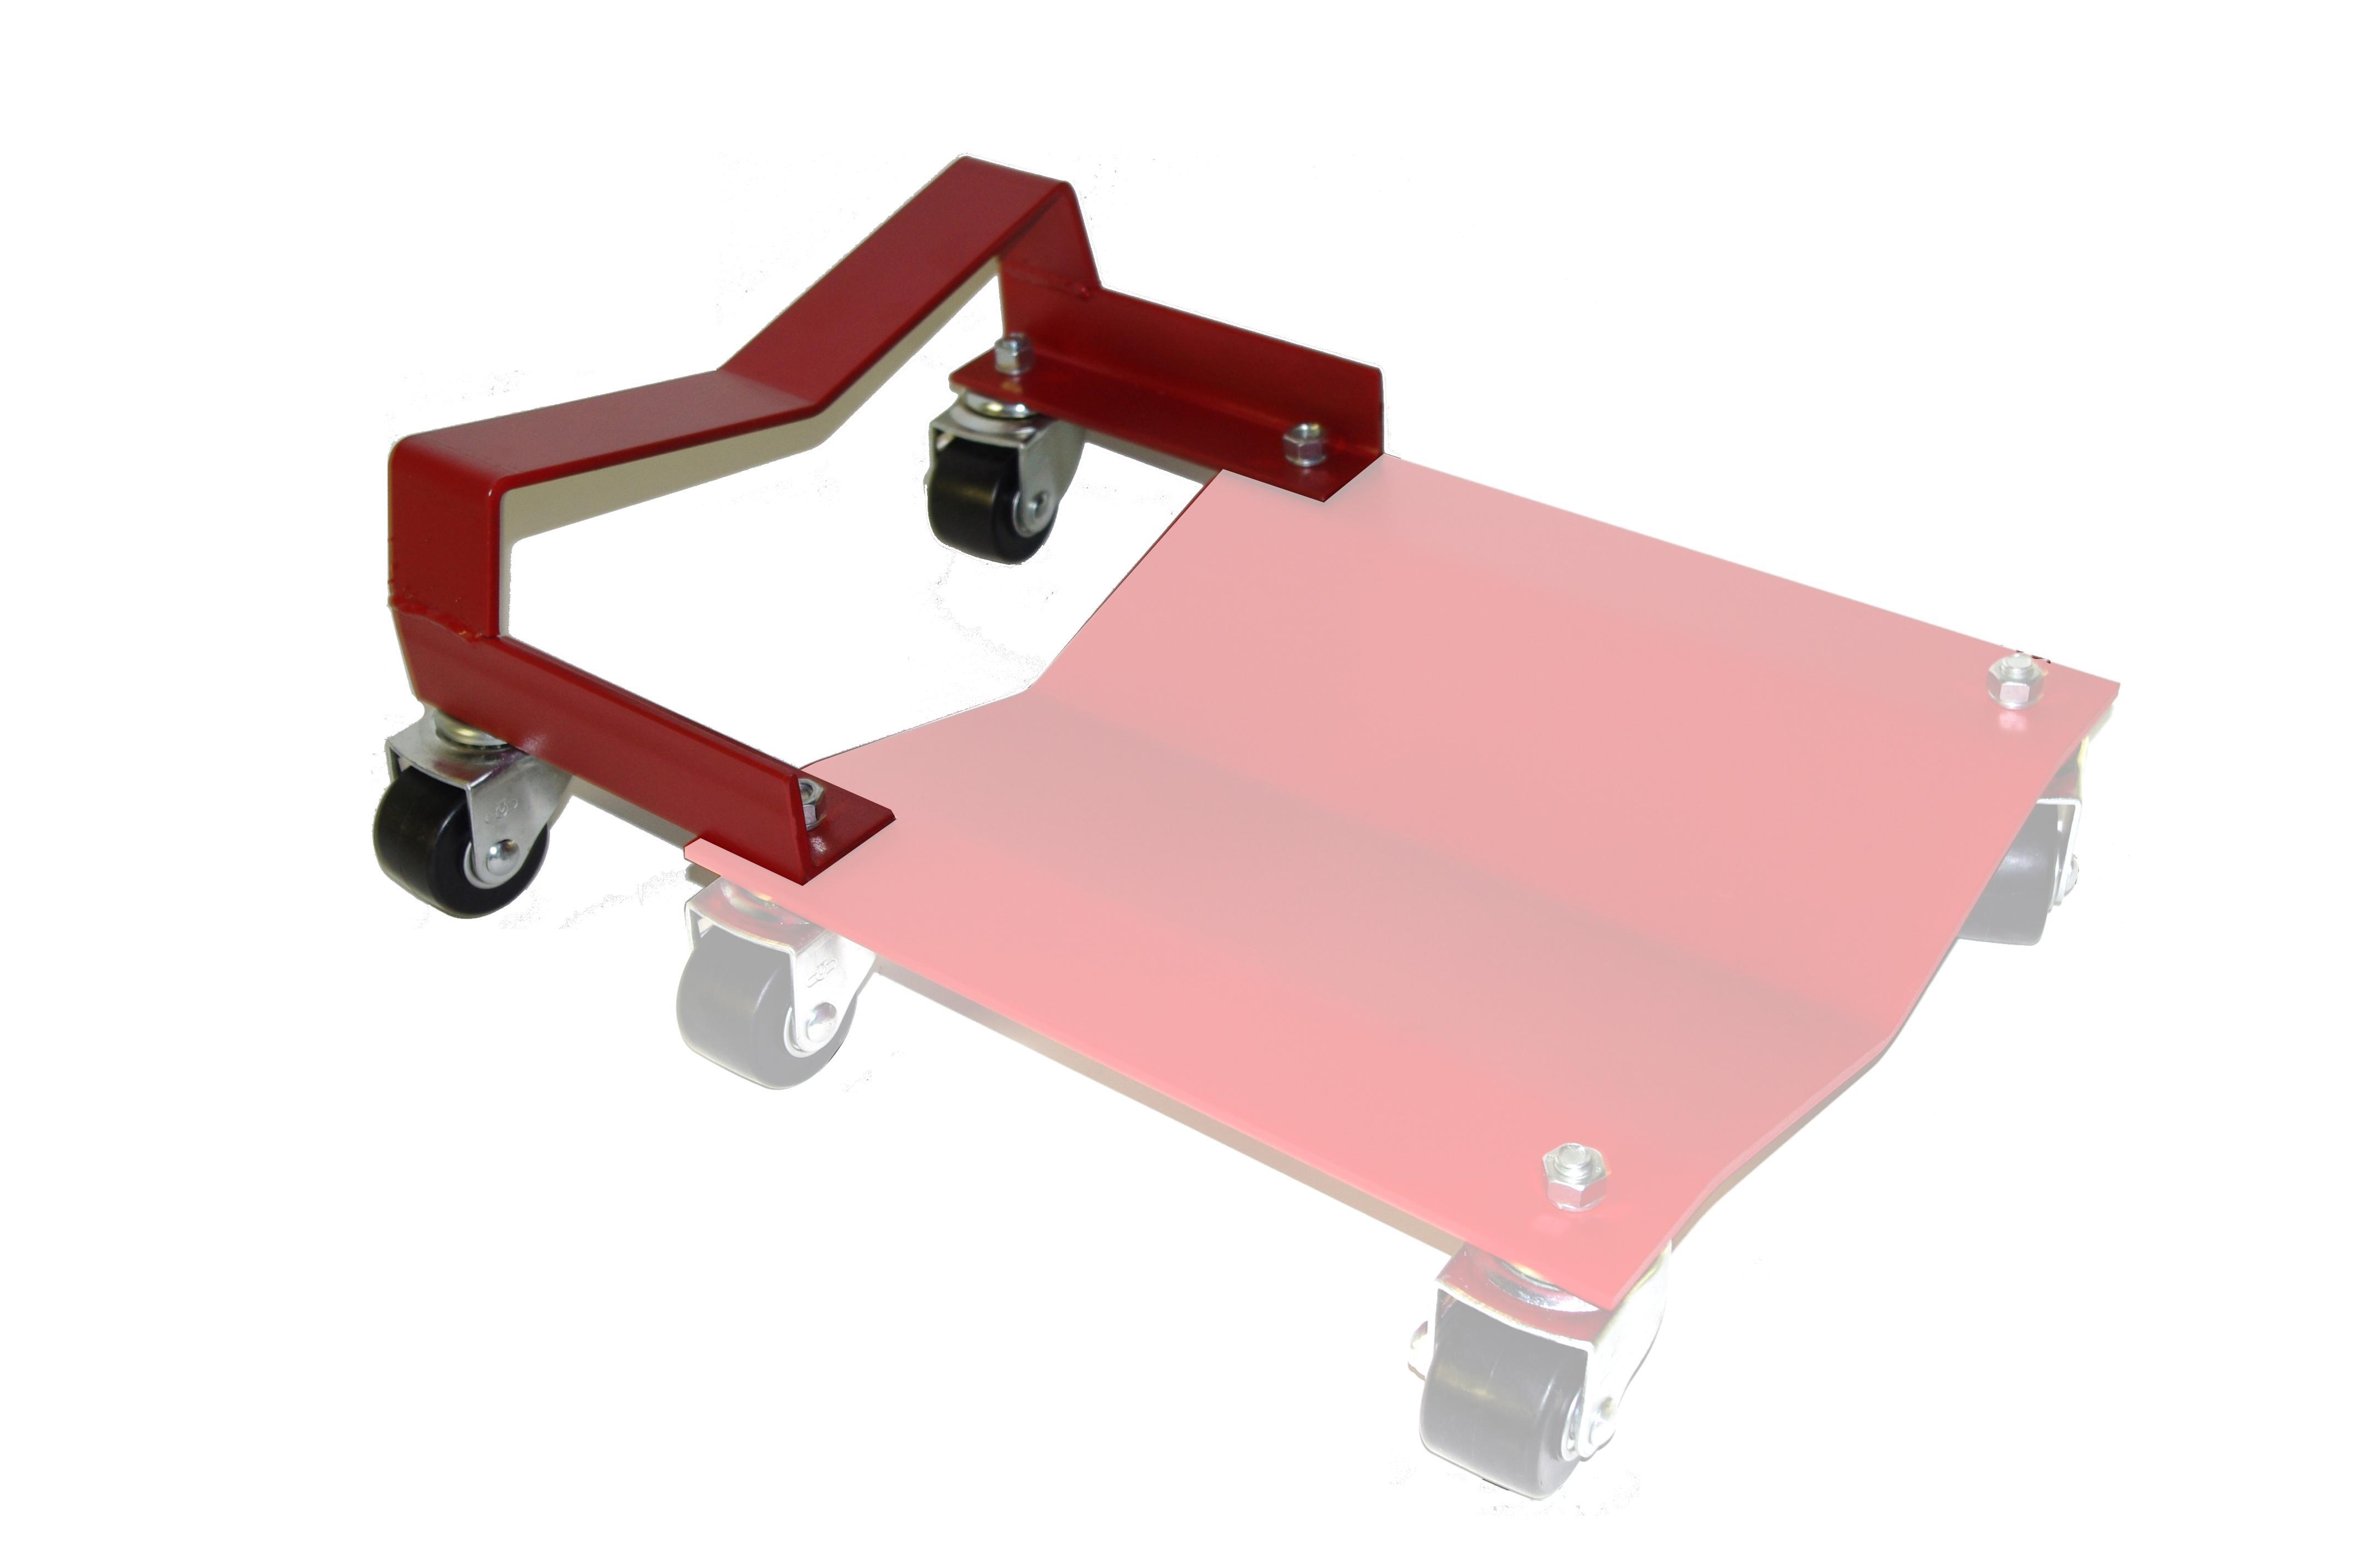 Engine Dolly Attachment - Standard